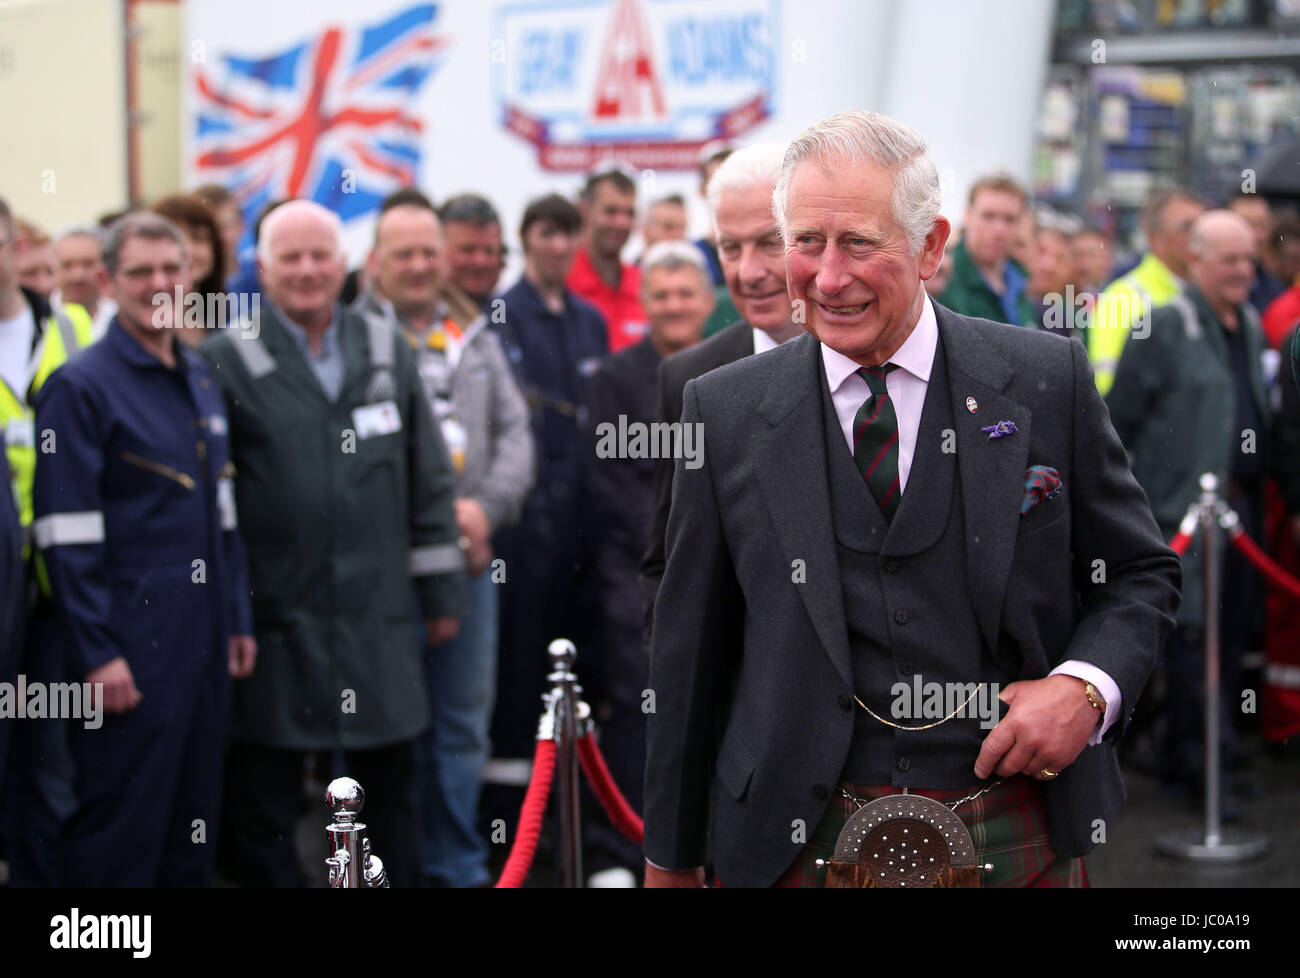 The Prince of Wales, known as the Duke of Rothesay while in Scotland, meets staff during a visit to Gray and Adams Limited in Fraserburgh. The company which makes refrigerated vehicles celebrates it's 60th anniversary. Stock Photo